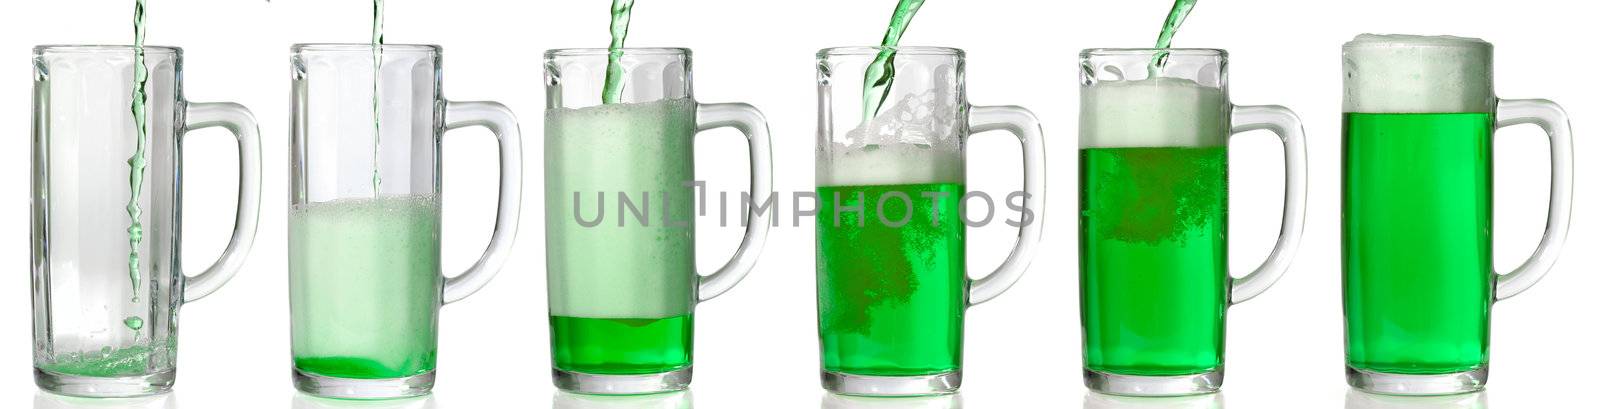 Green Beer mug isolated on white. Pouring green beer in it. 43 Mpxls.